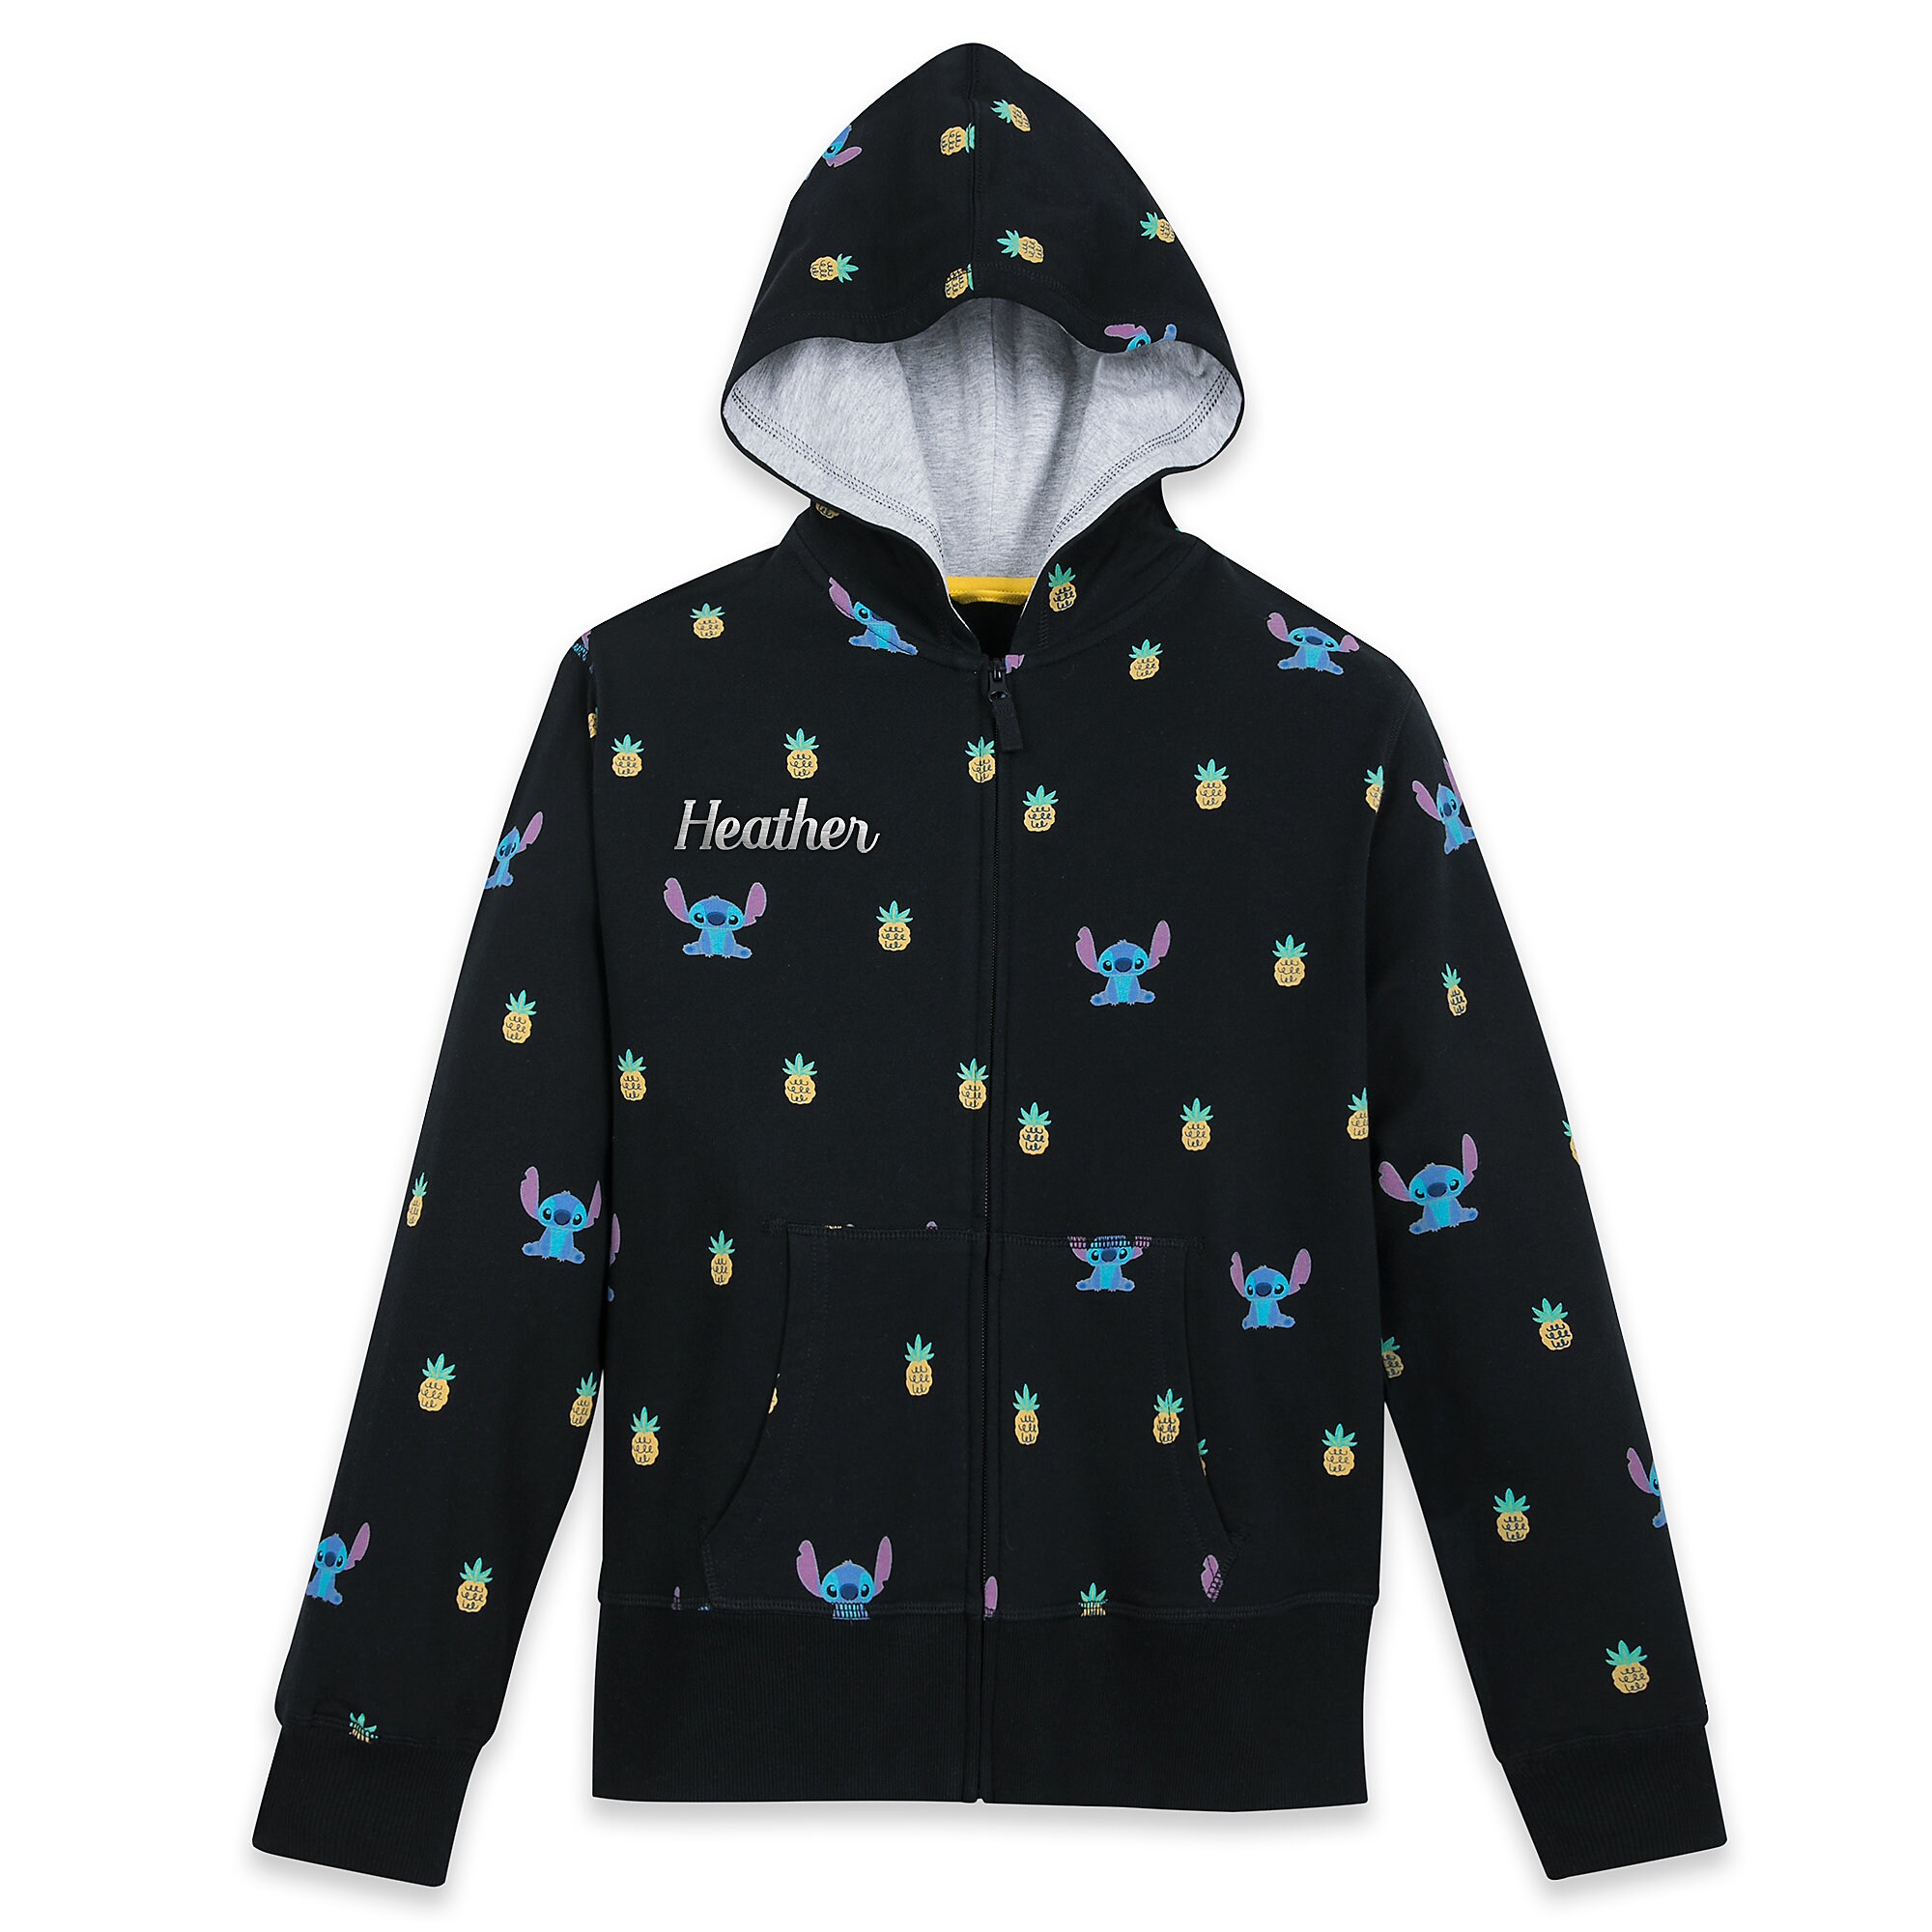 Stitch Zip-Up Hoodie for Adults - Personalized